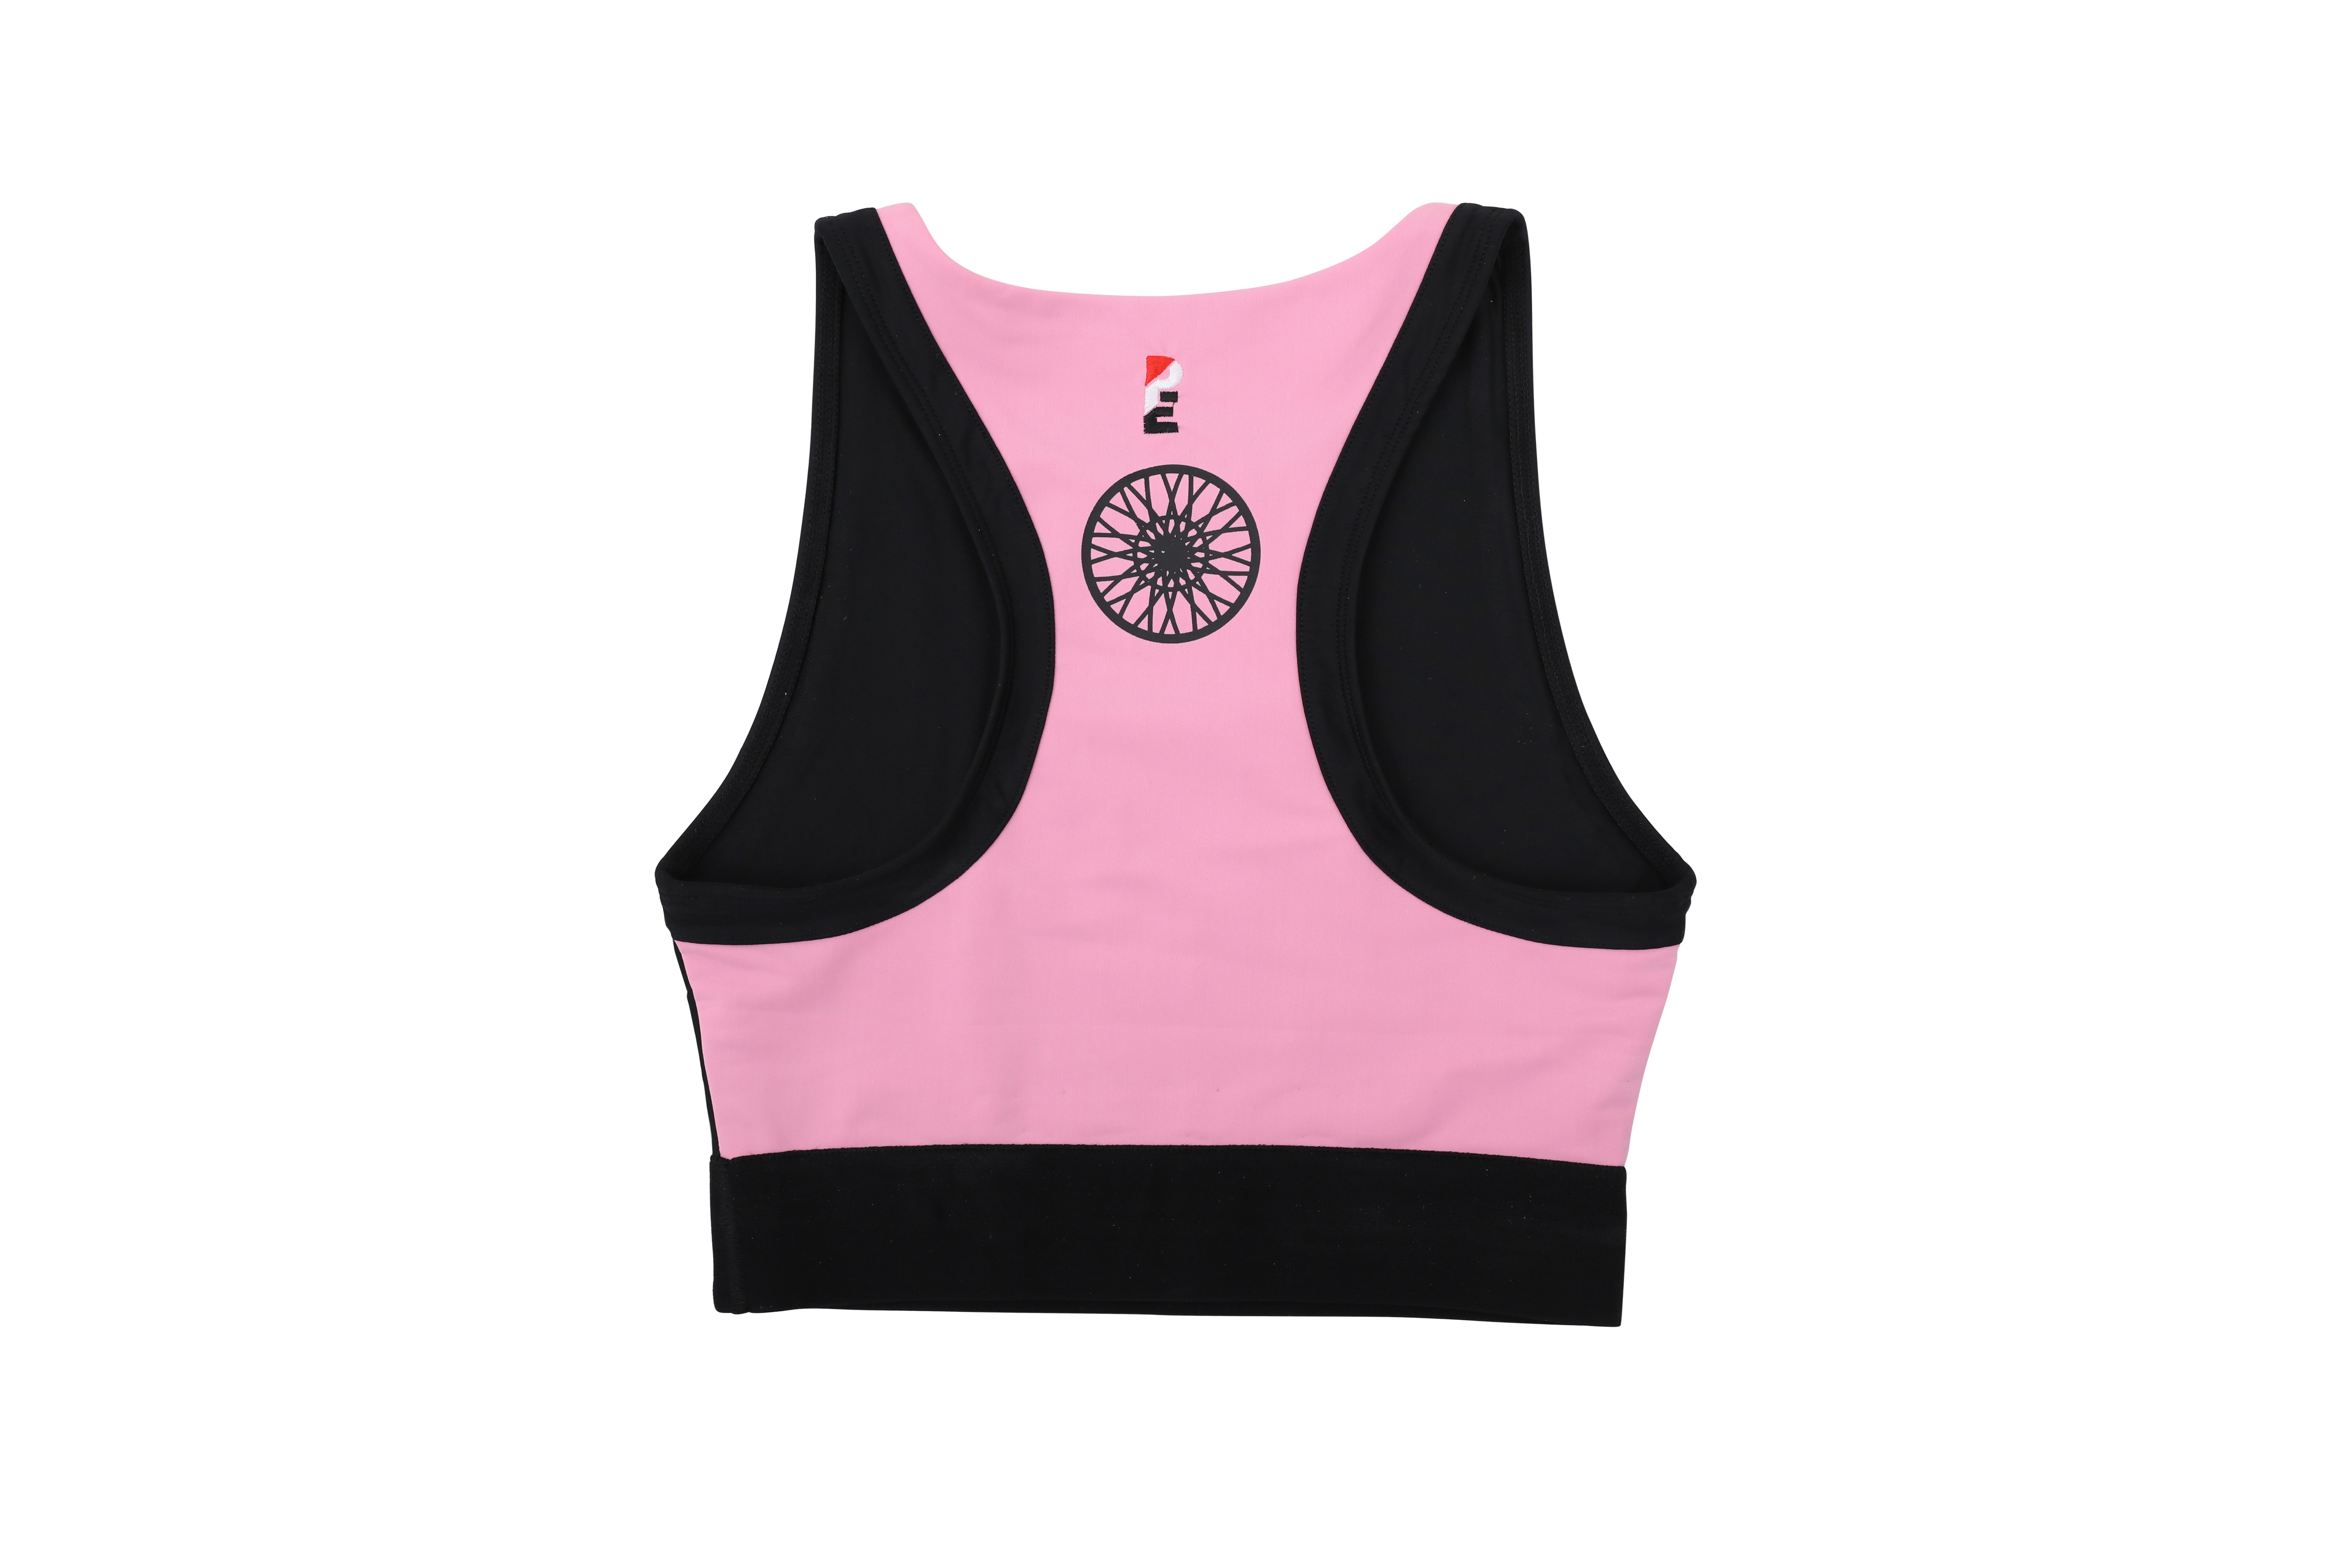 PE Nation P.E Nation SoulCycle Spinning Studio Workout Gear New Year's Resolution Capsule Collection Active Wear Leggings Sportswear Sports Bra Athleisure